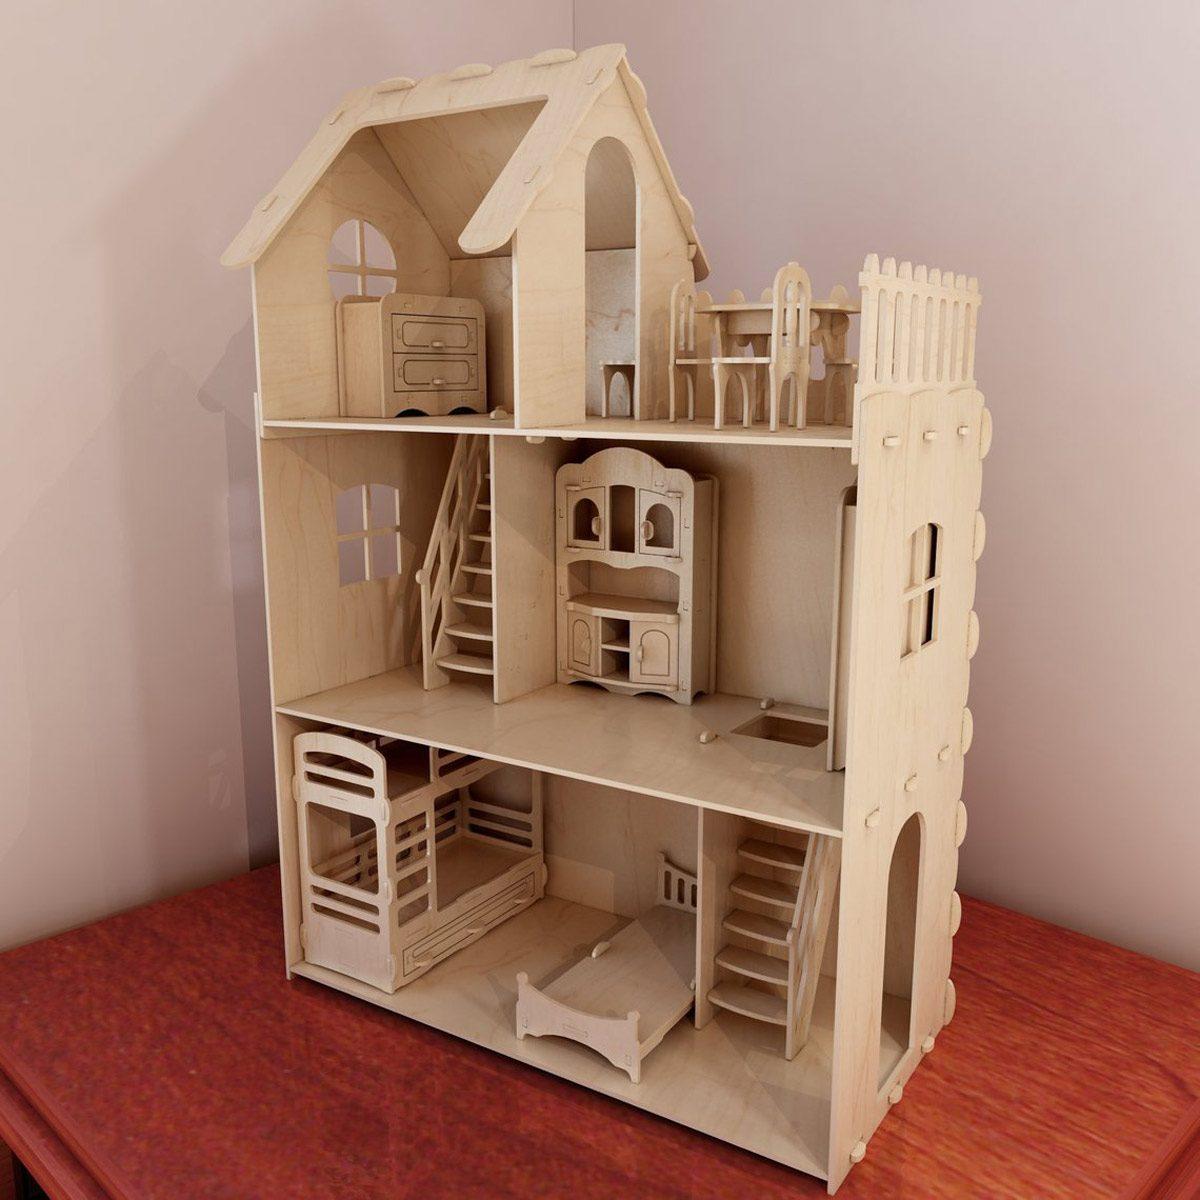 10 Homemade Barbie Houses You Wish You Lived In Family